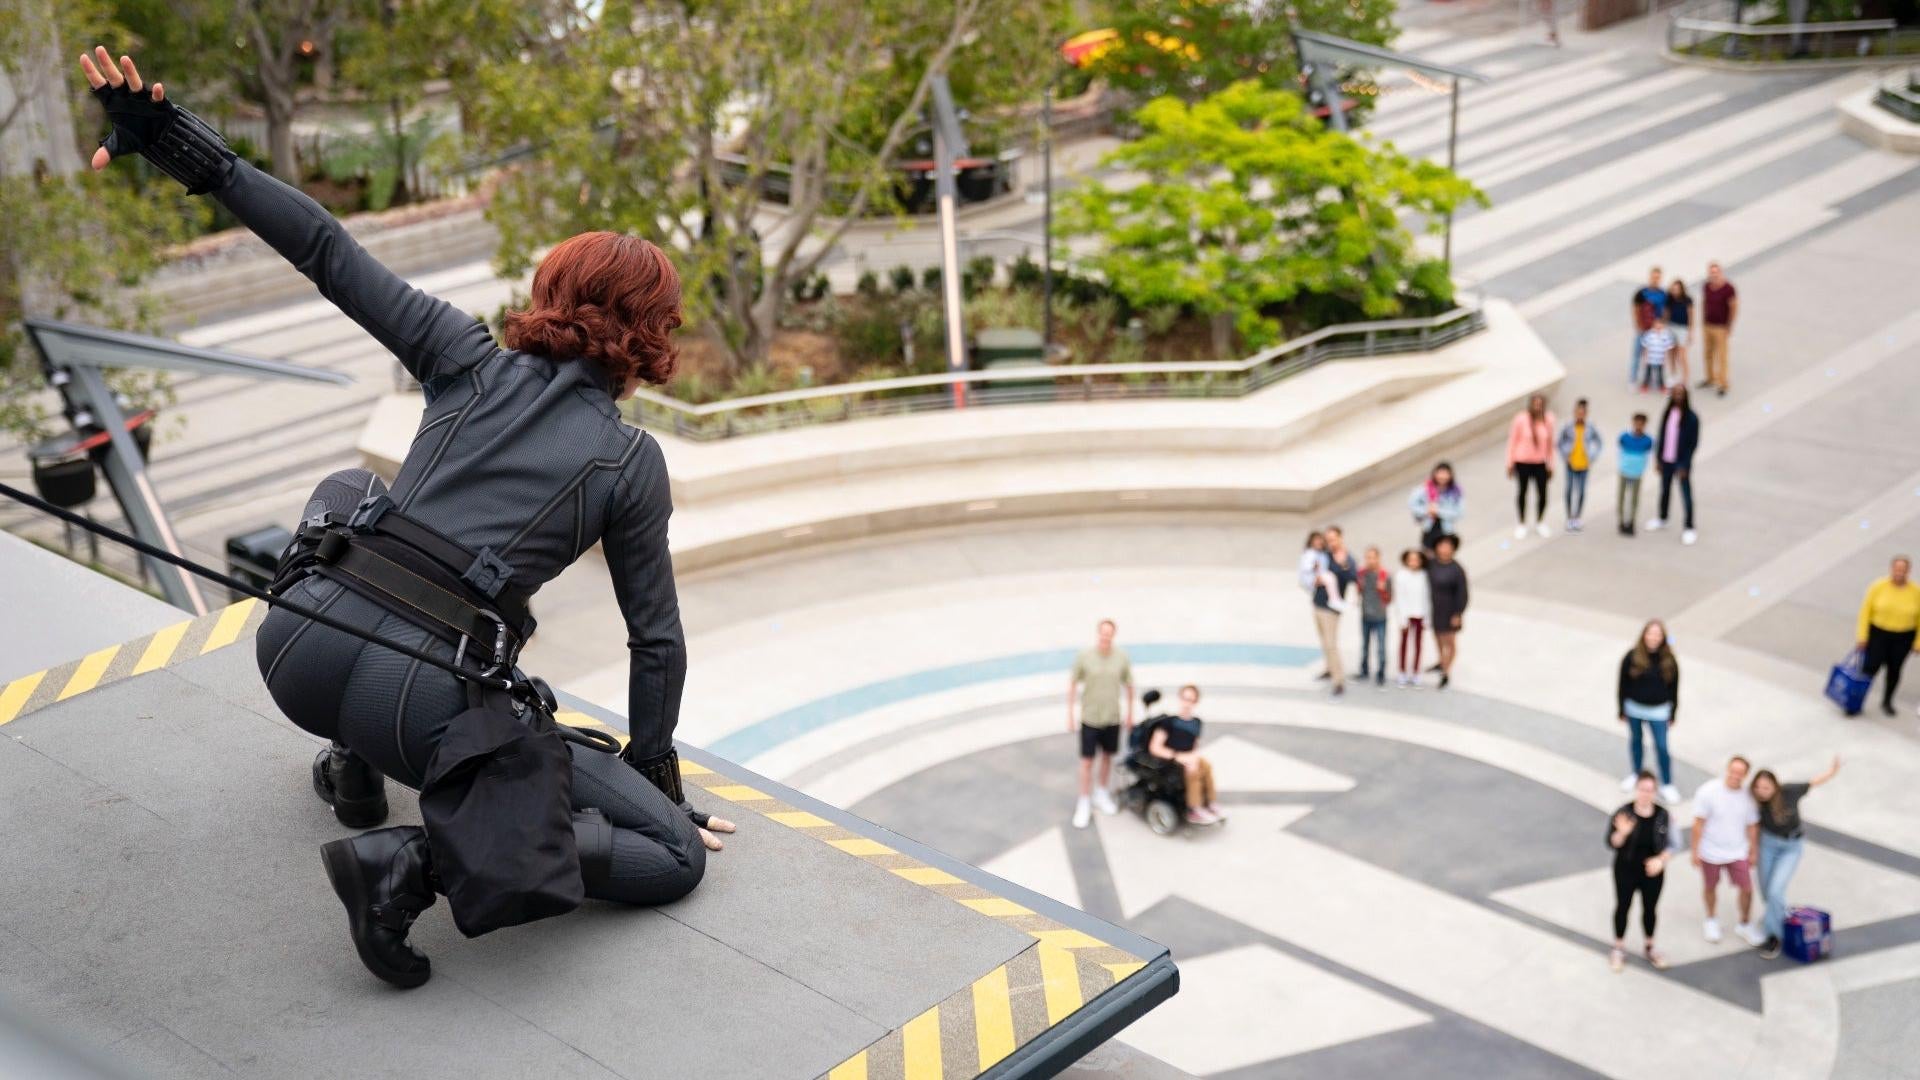 Black Widow keeping an eye on things from Avengers HQ. (Photo: Disney Parks)